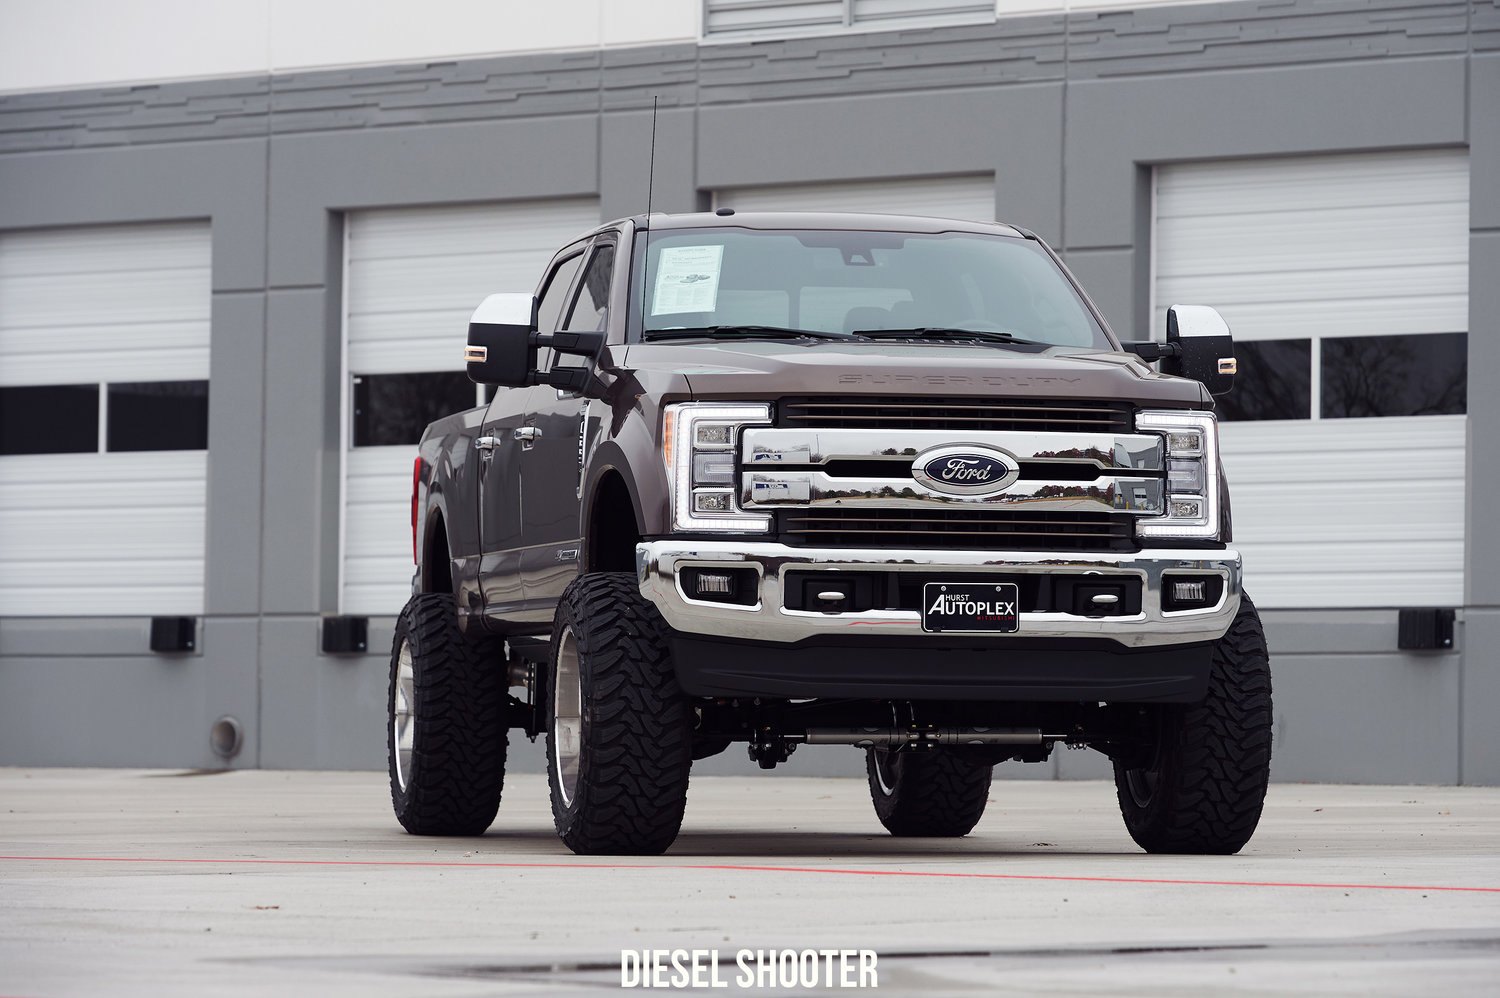 2017 Ford F-250 King Ranch on Toyo Tires - Photo by Diesel Shooter